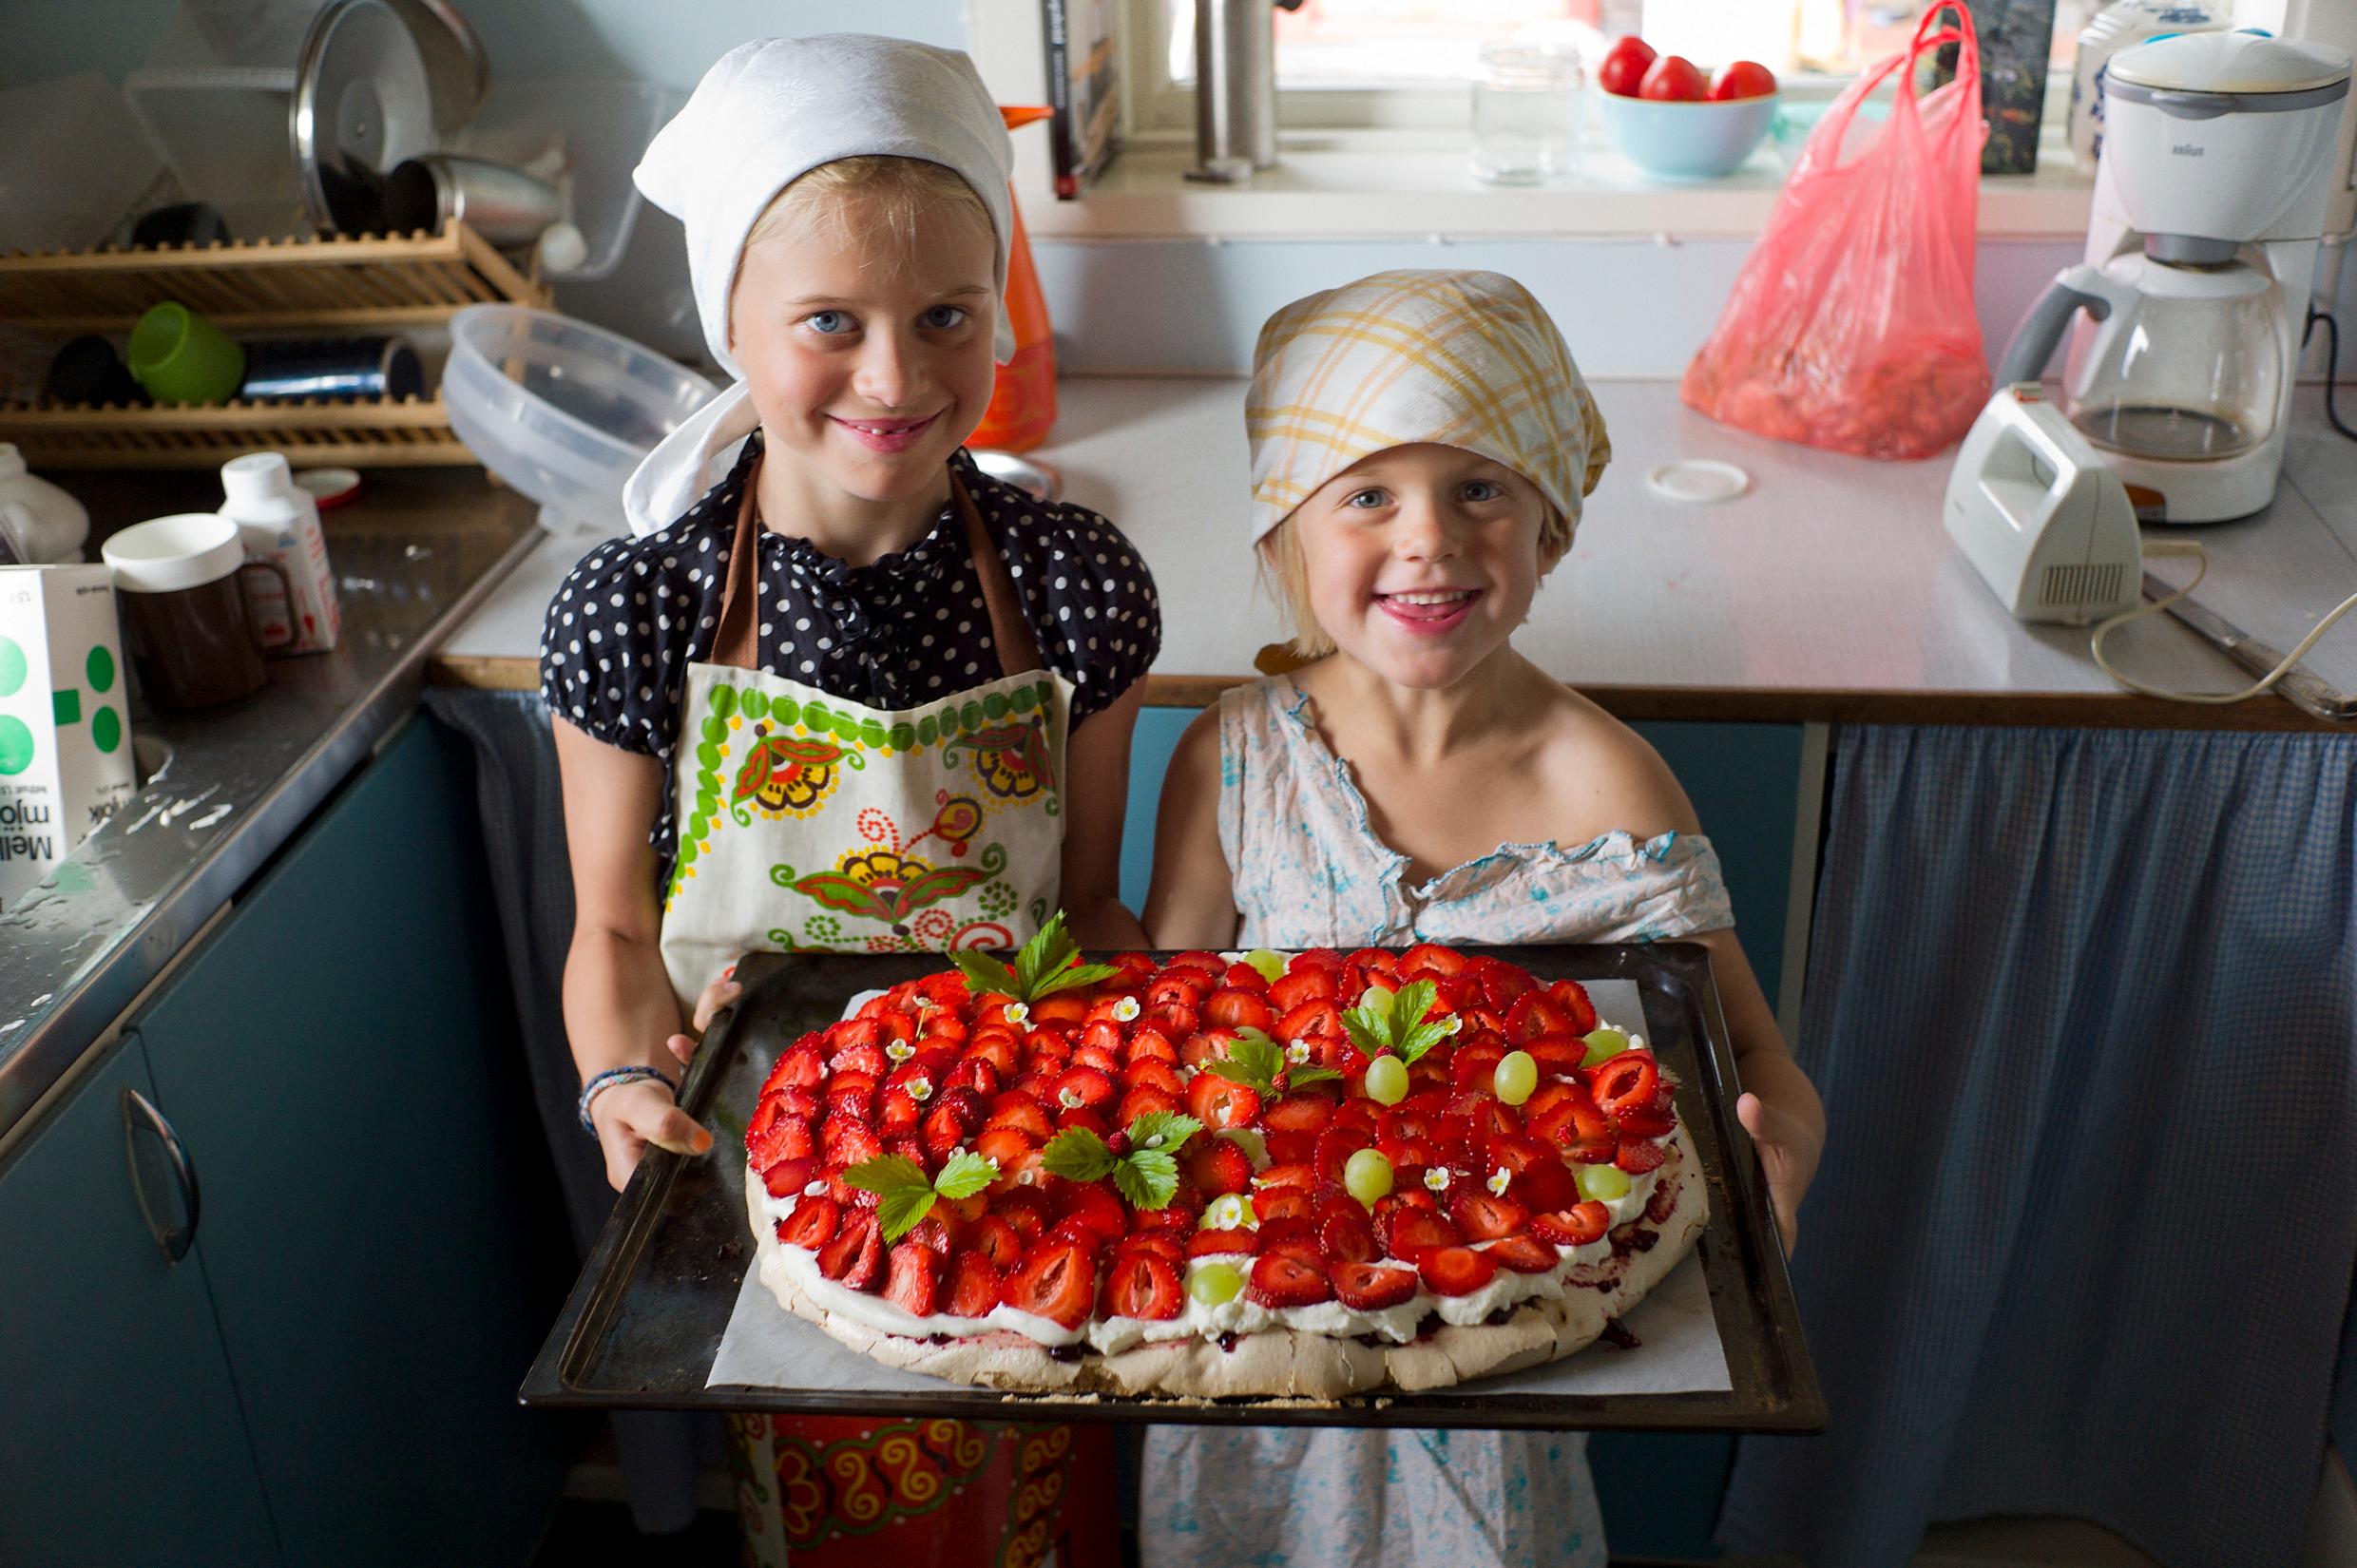 Two girls with headscarves and aprons holding a strawberry cake.